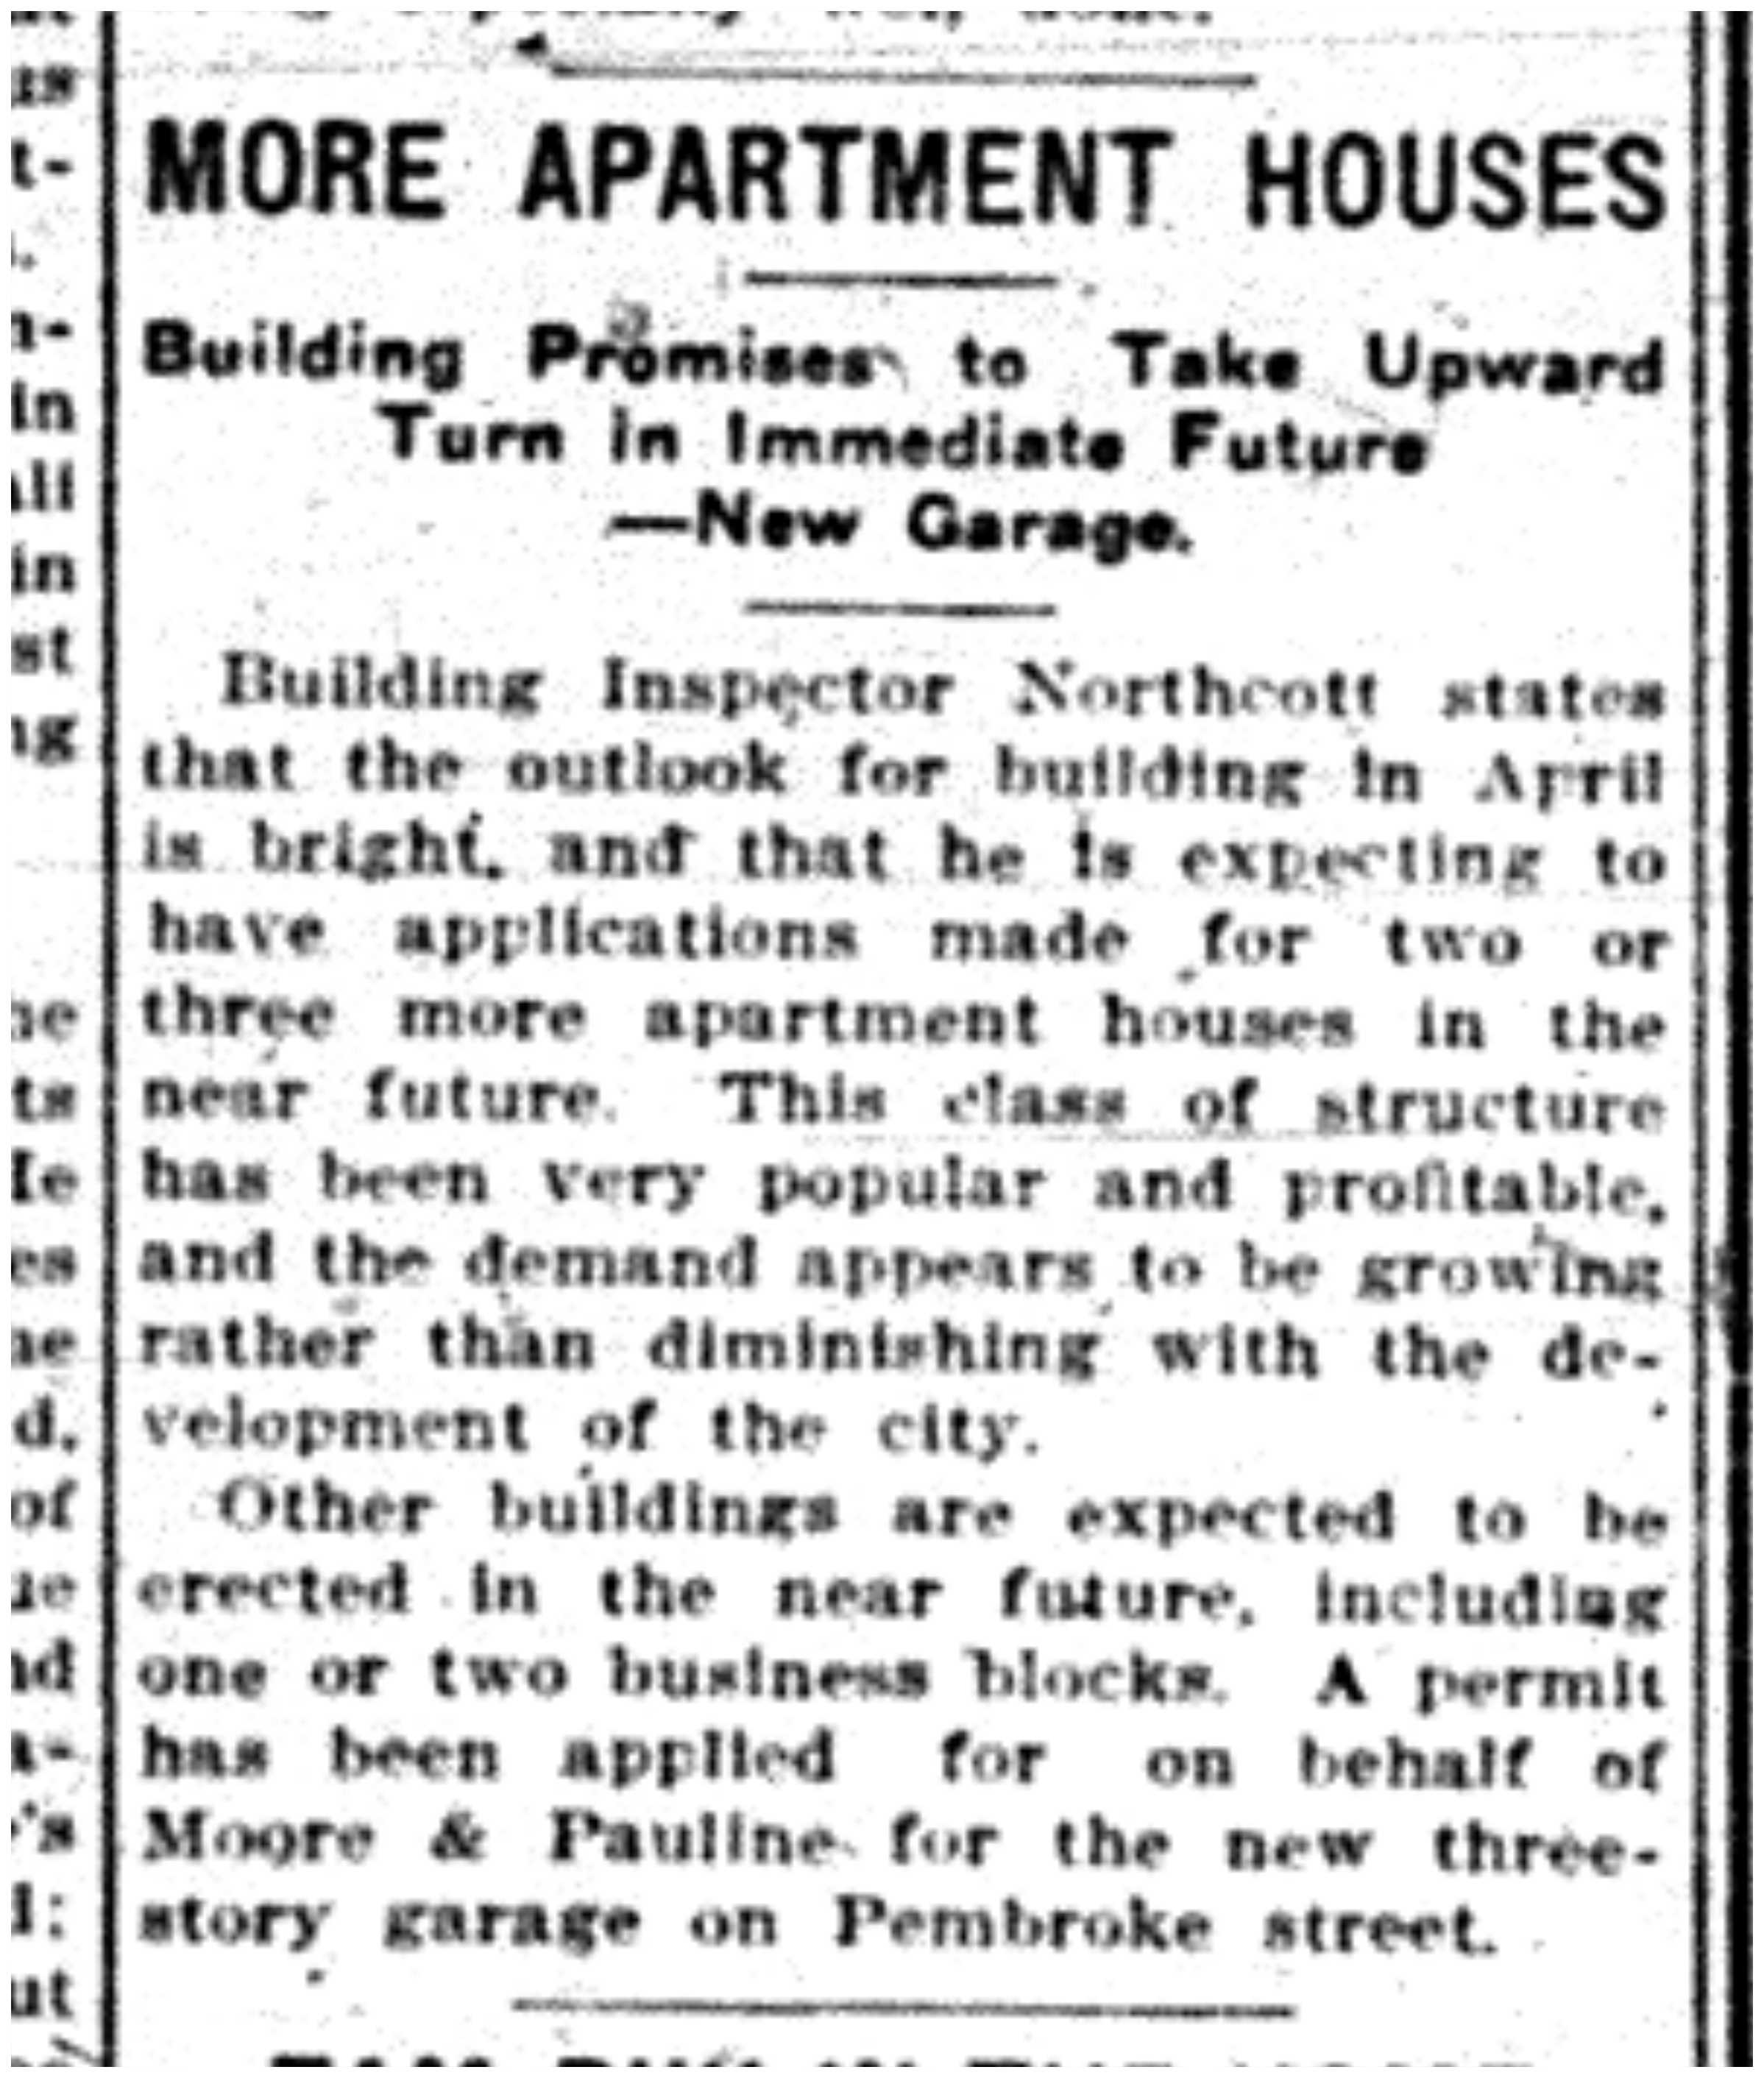 "More Apartment Houses"